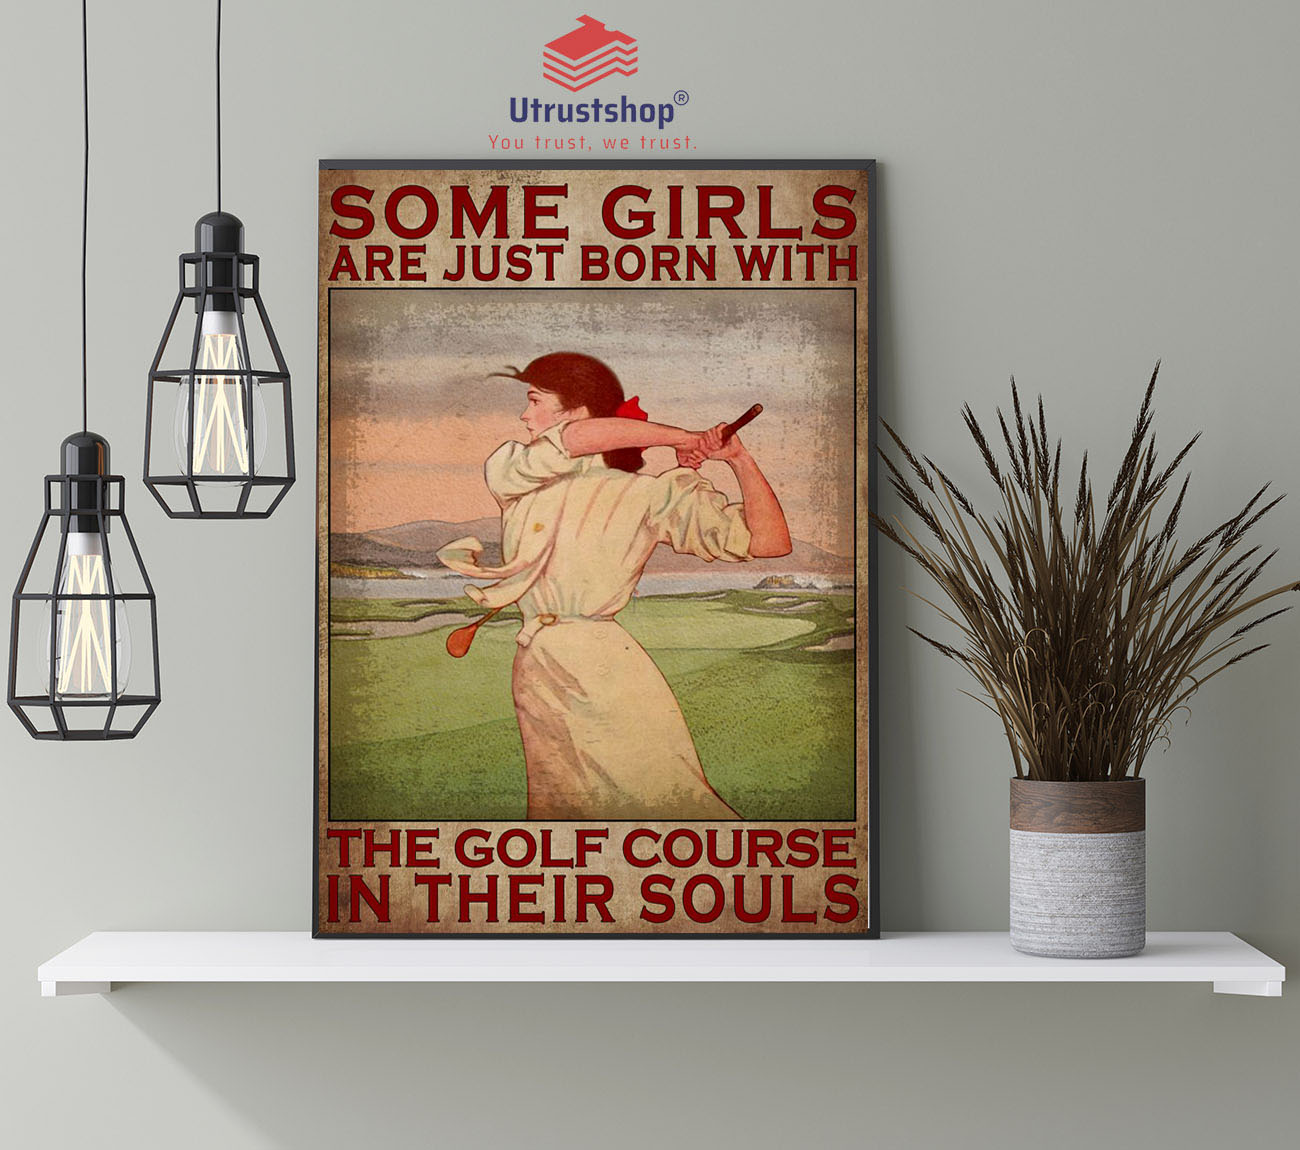 Some girls are just born with the golf course in their souls poster4